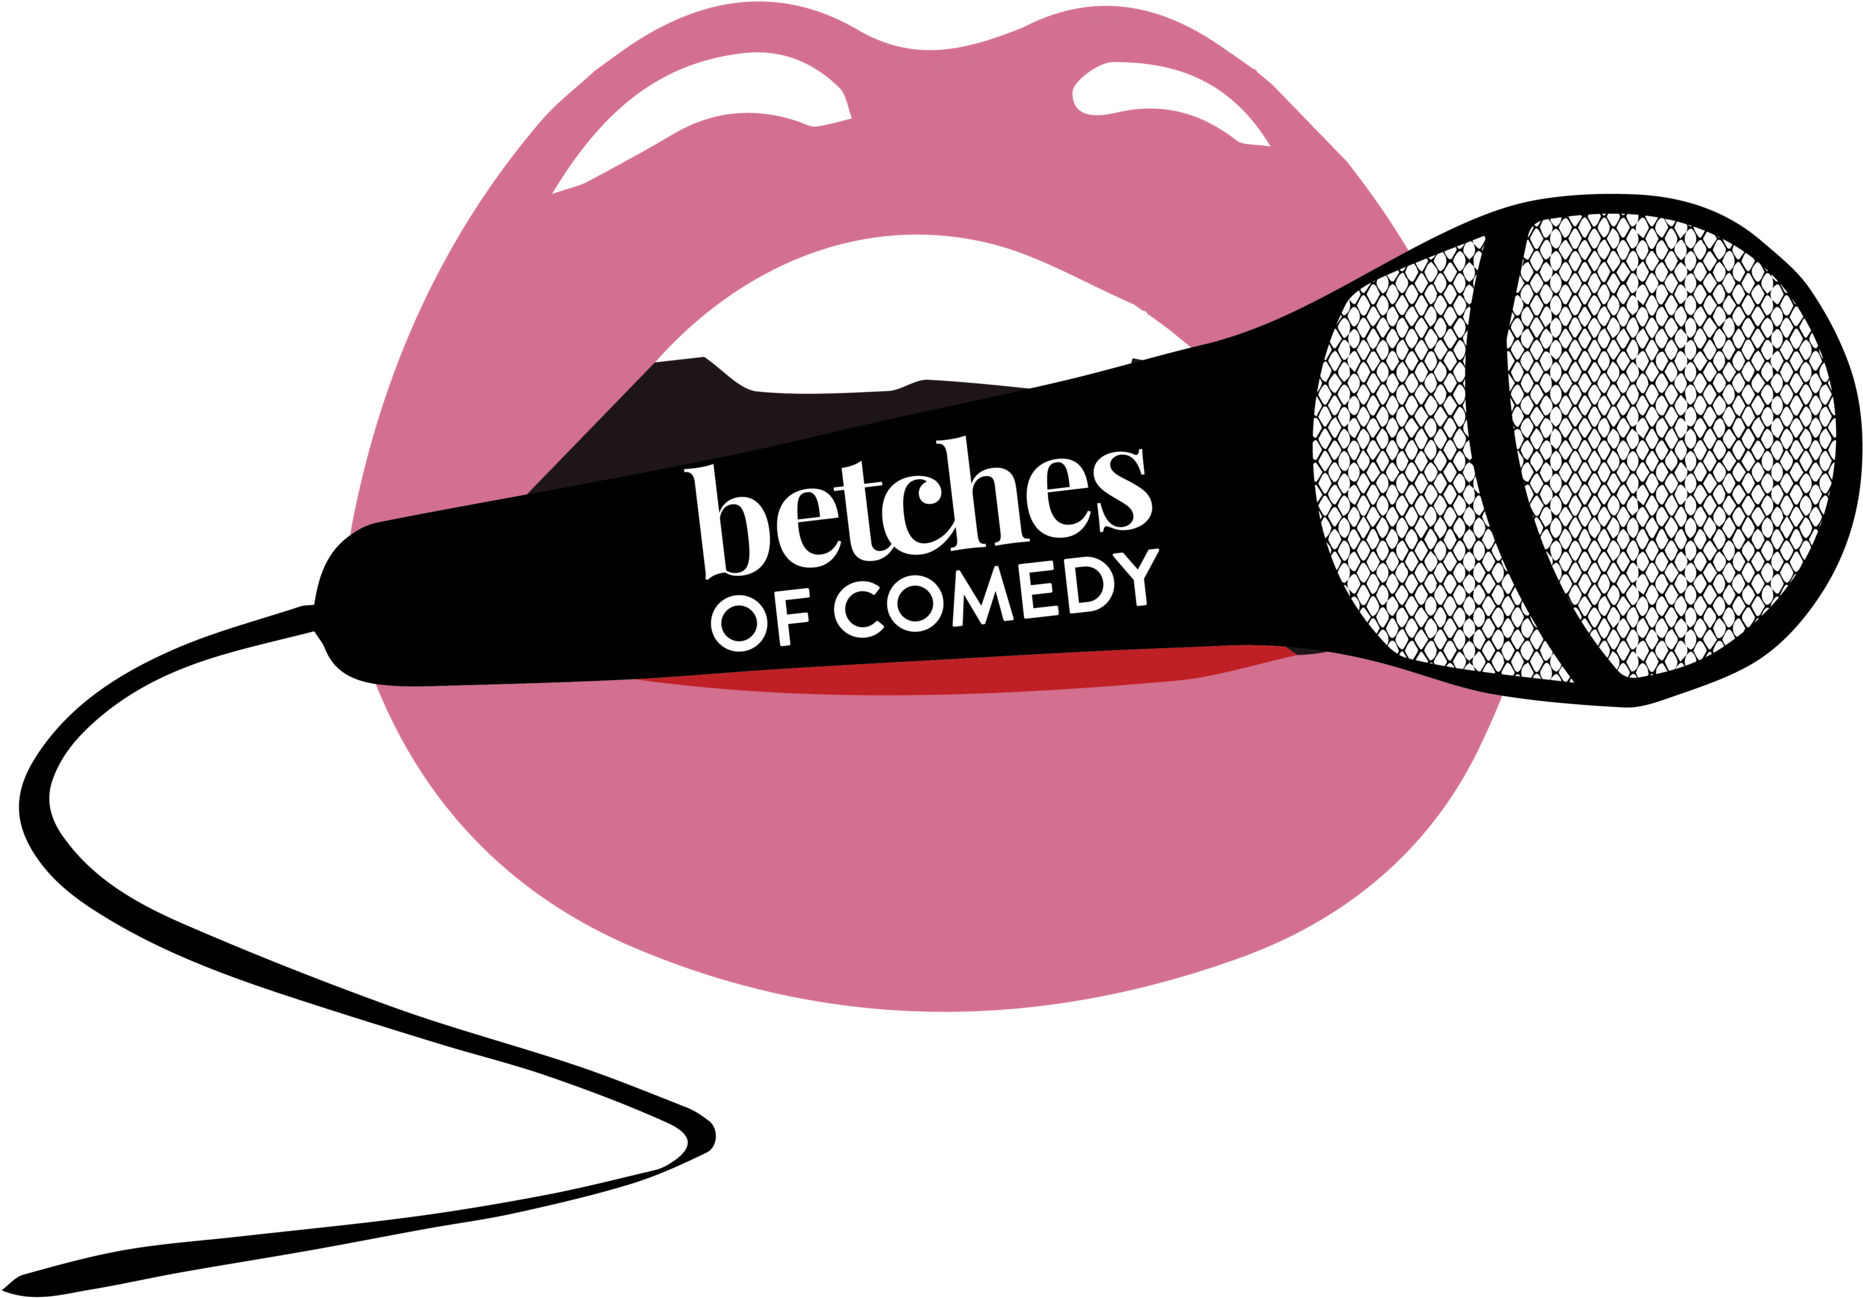 Betches Who Brunch Comedy Tour Live At Arlington Drafthouse - Betches Who Brunch Comedy Tour Live At Arlington Drafthouse (2048x2048)